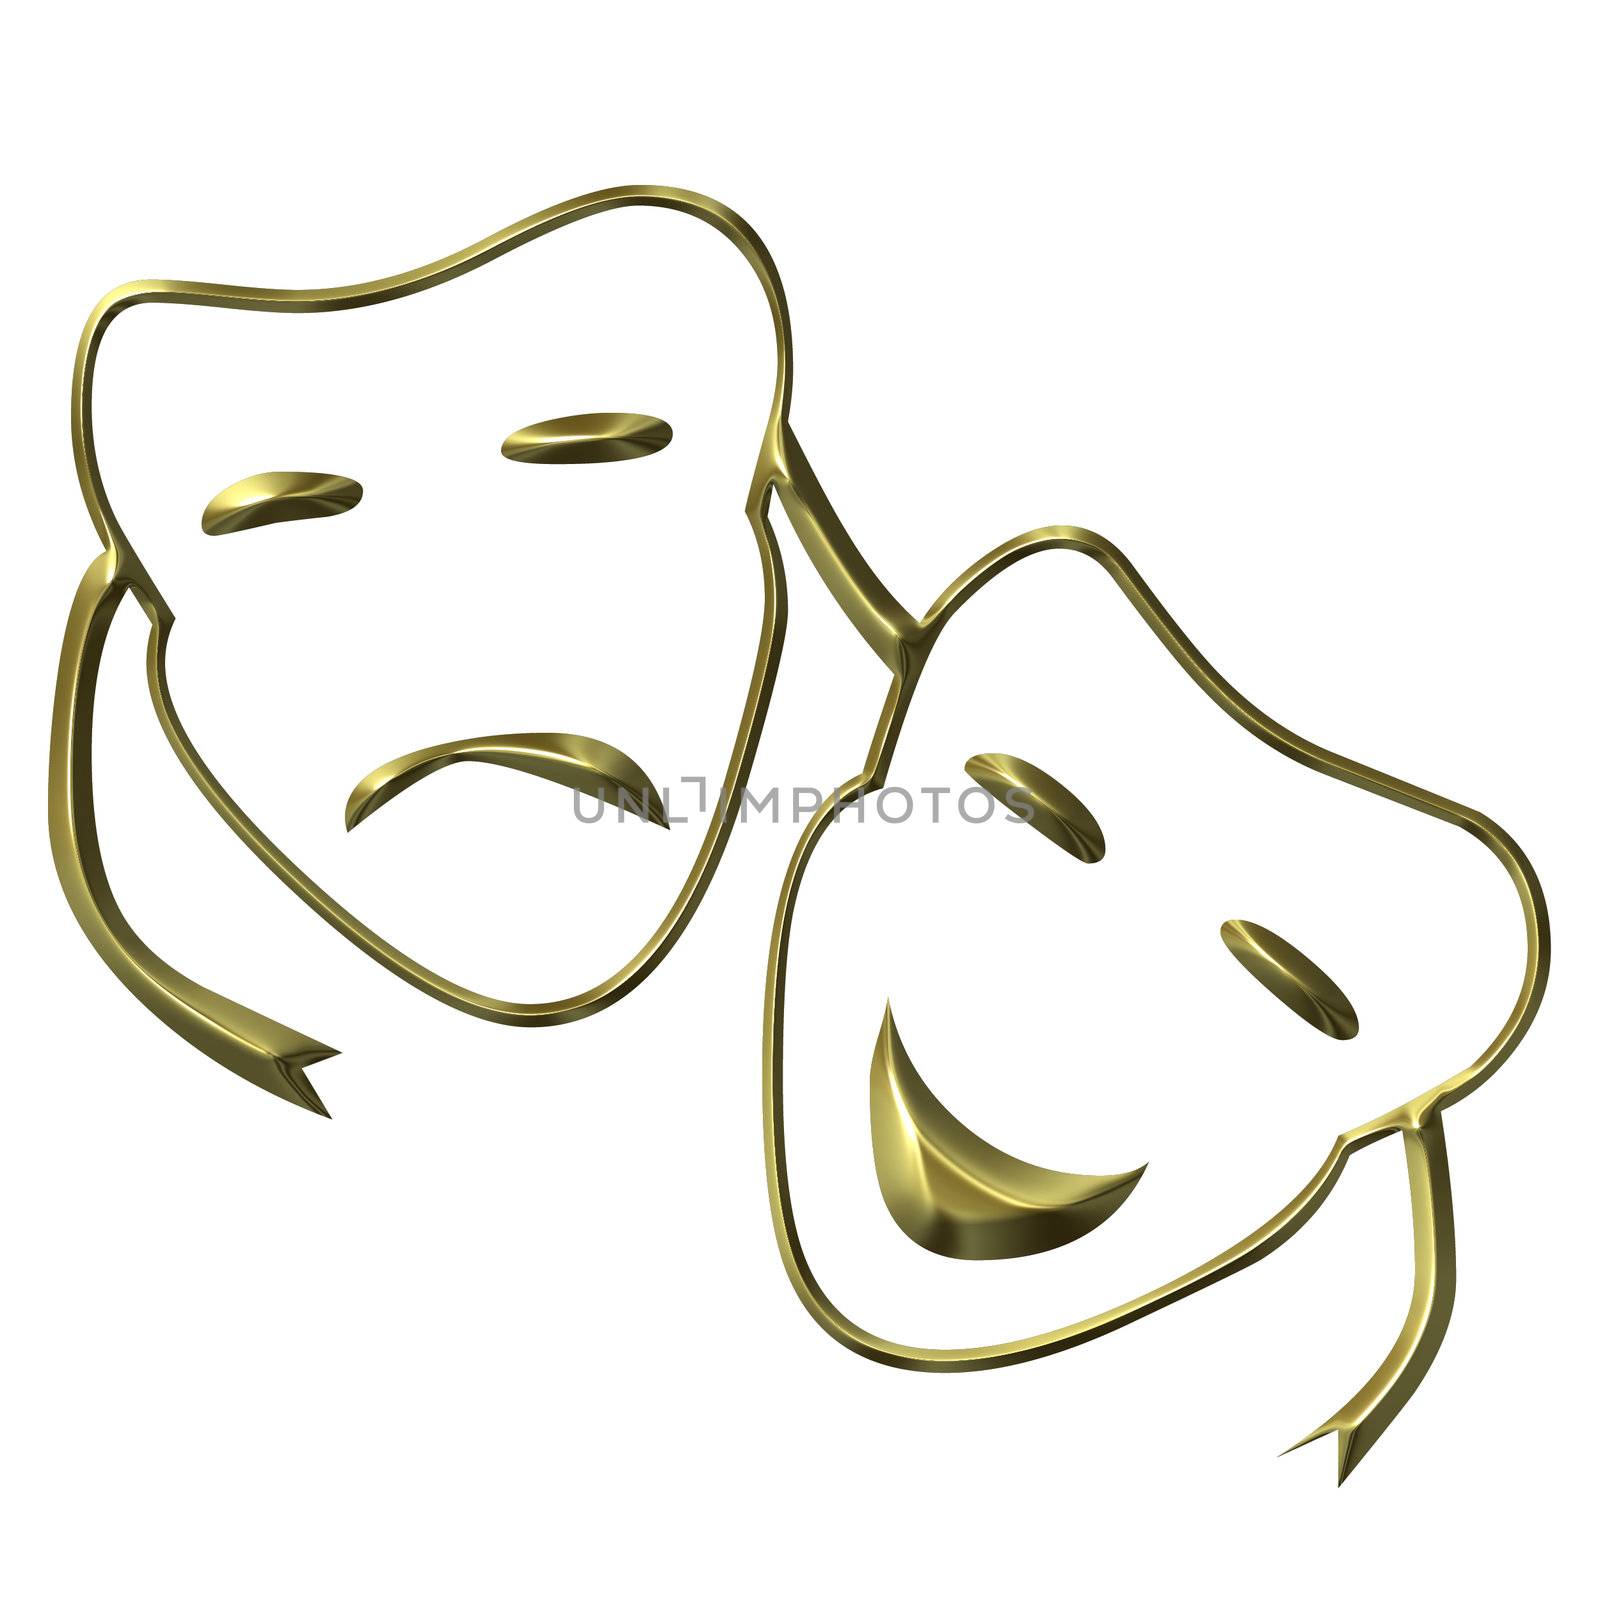 Theatrical masks of drama and comedy by Georgios